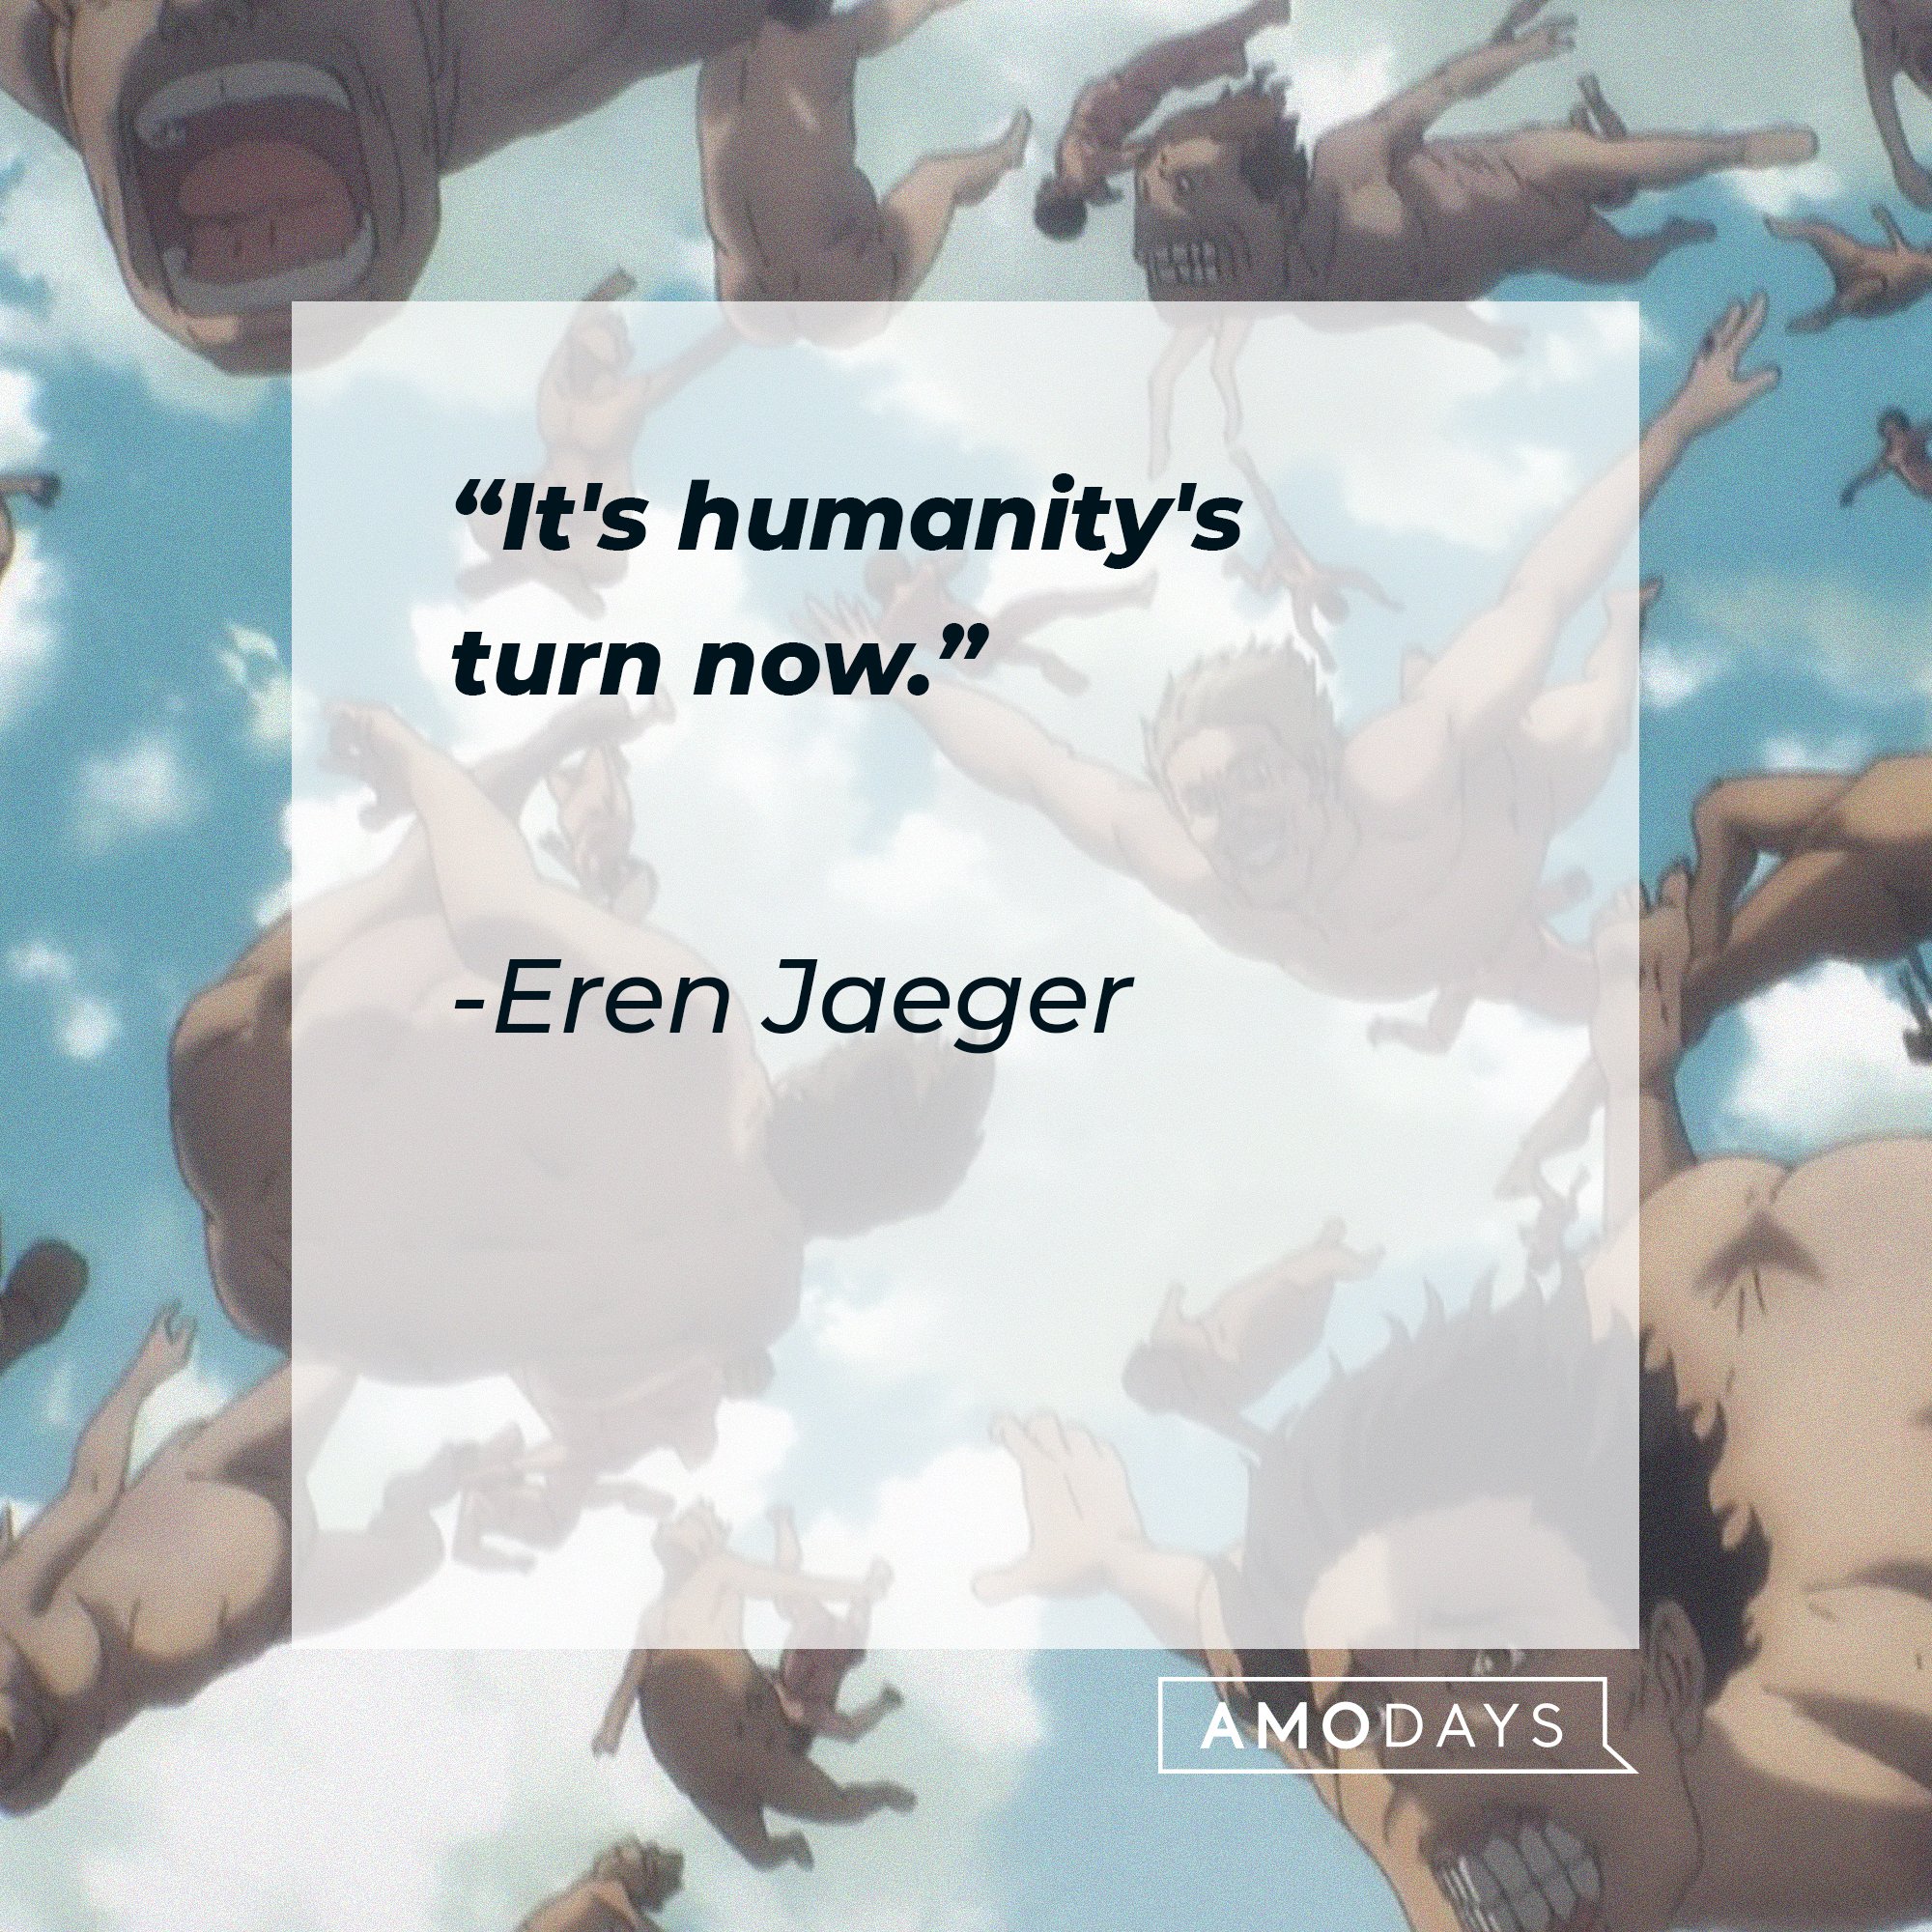 Eren Jaeger’s quote: "It's humanity's turn now.” | Image: AmoDays